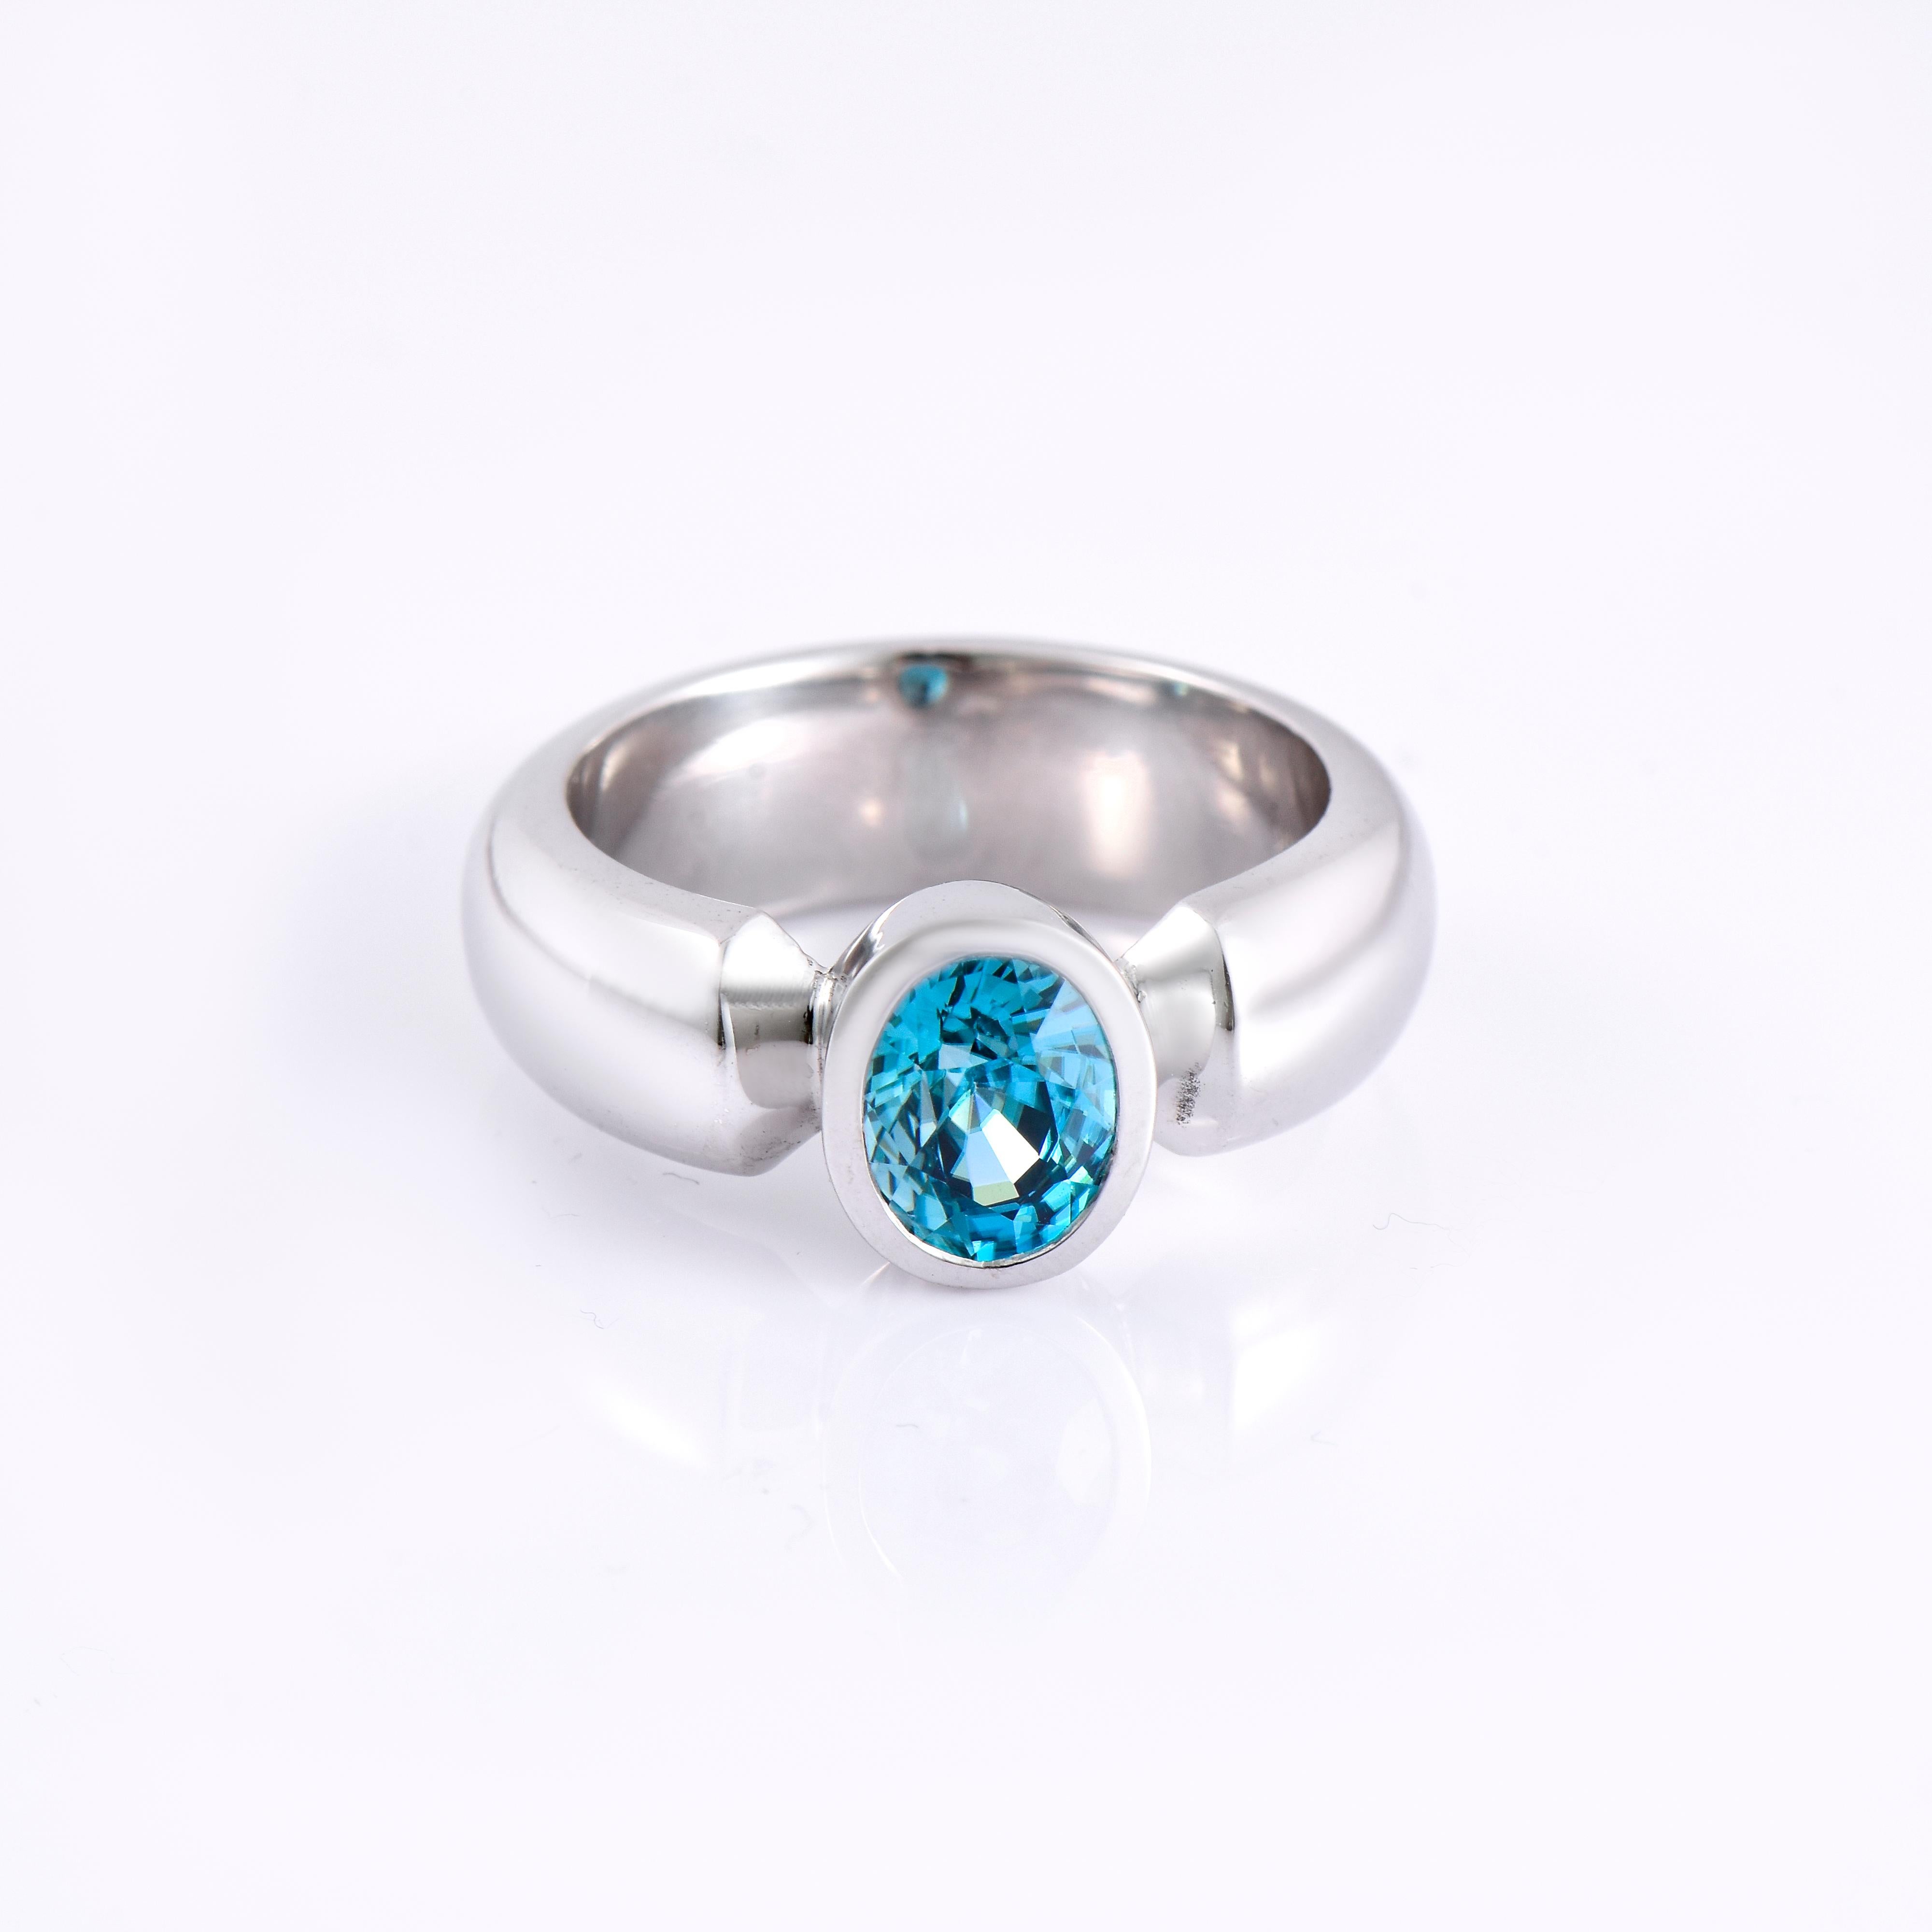 Contemporary Orloff of Denmark, 2.38 ct Natural Blue Zircon Ring in 925 Sterling Silver For Sale